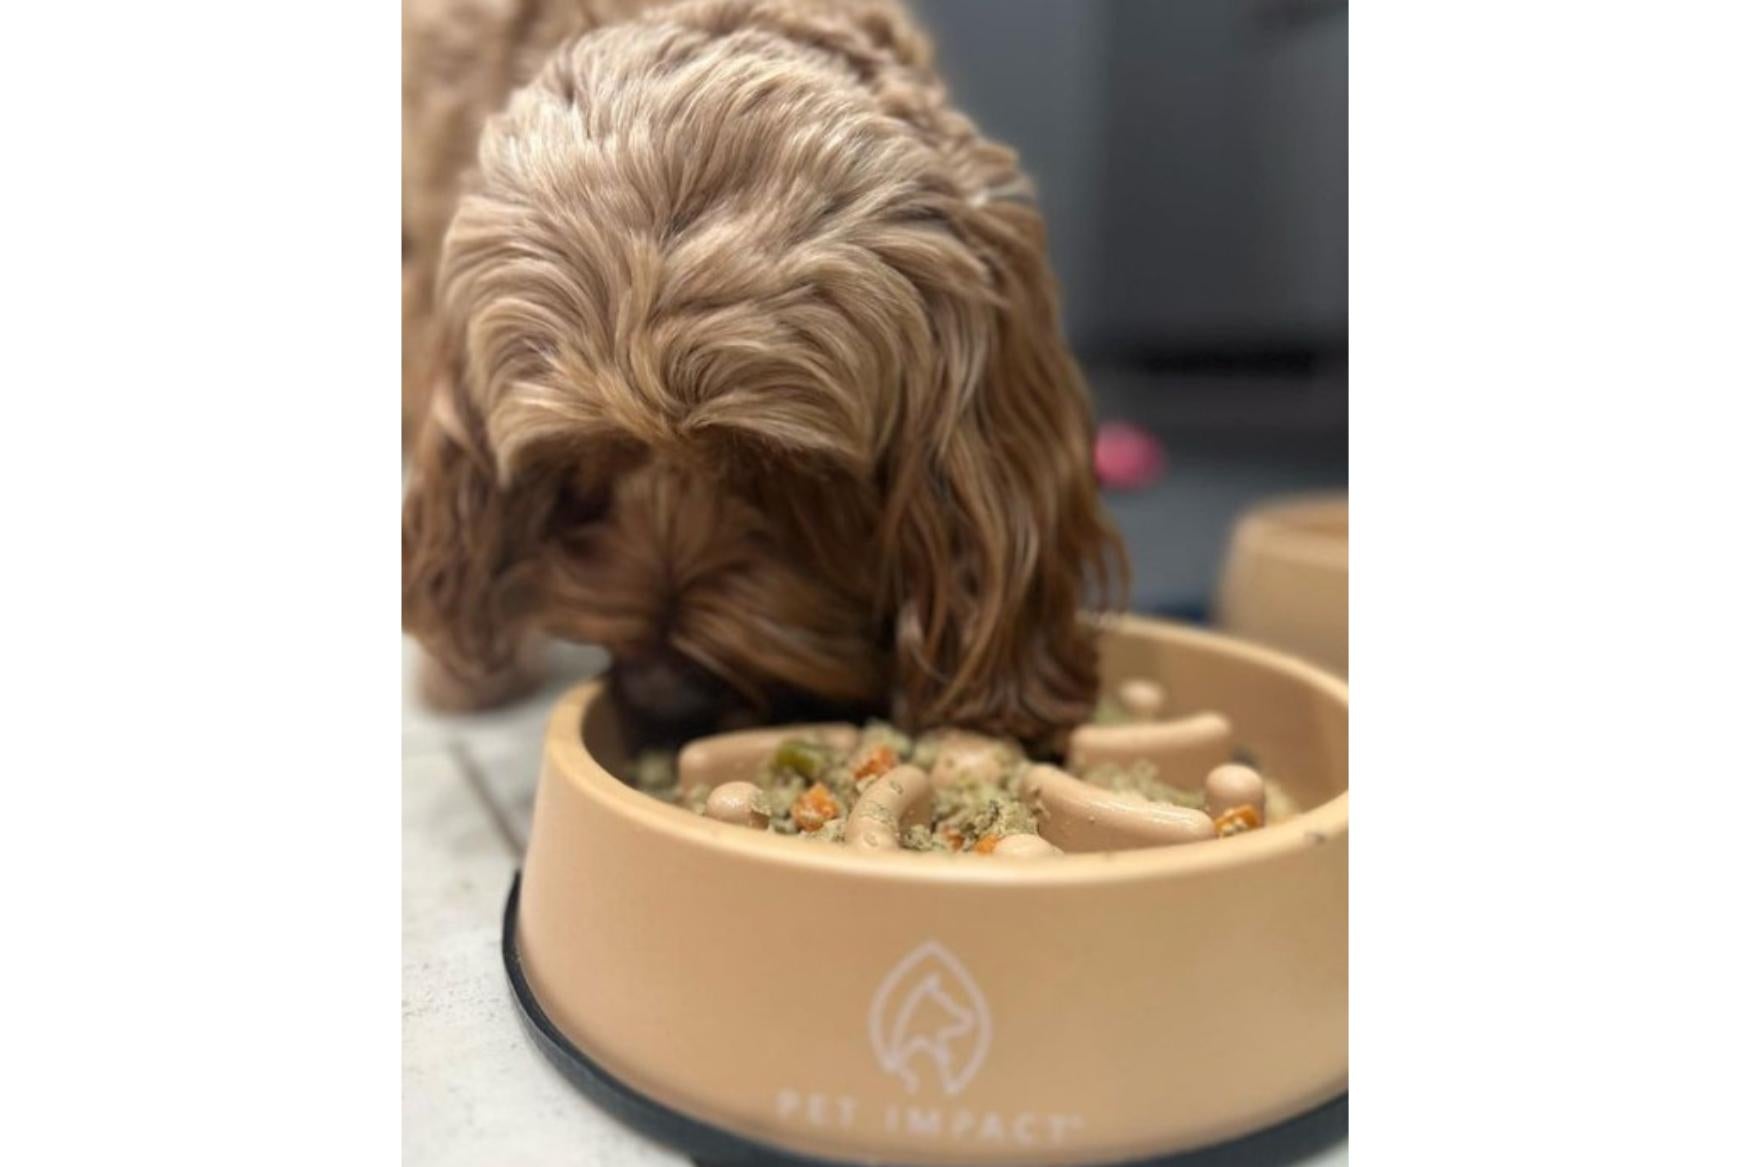 A dog eating from a slow feeder bowl